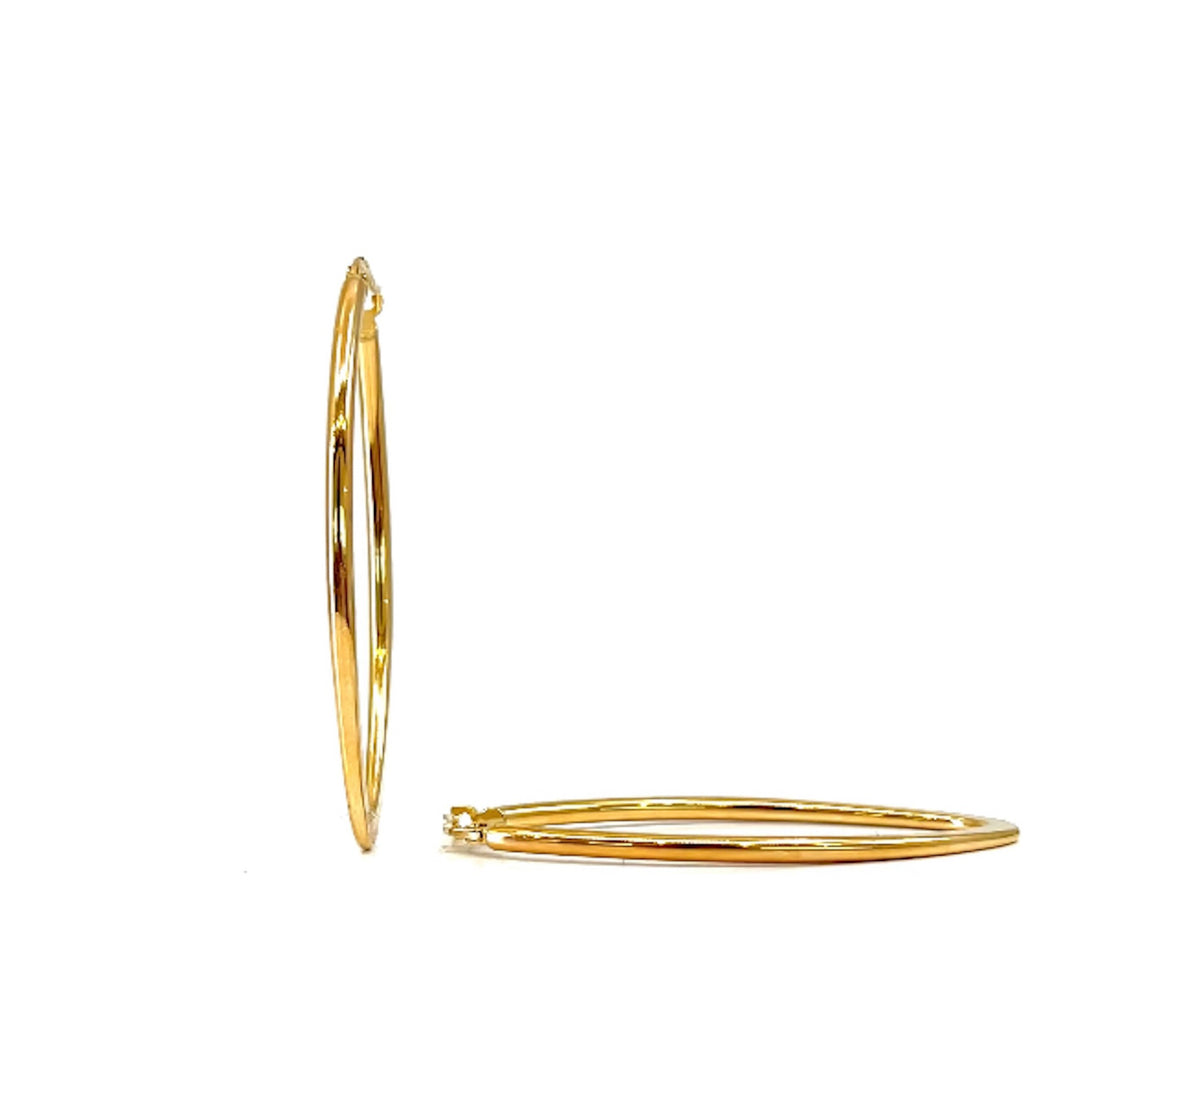 10K Yellow Gold Pointed Oval Design Hoops - 43mm x 23mm